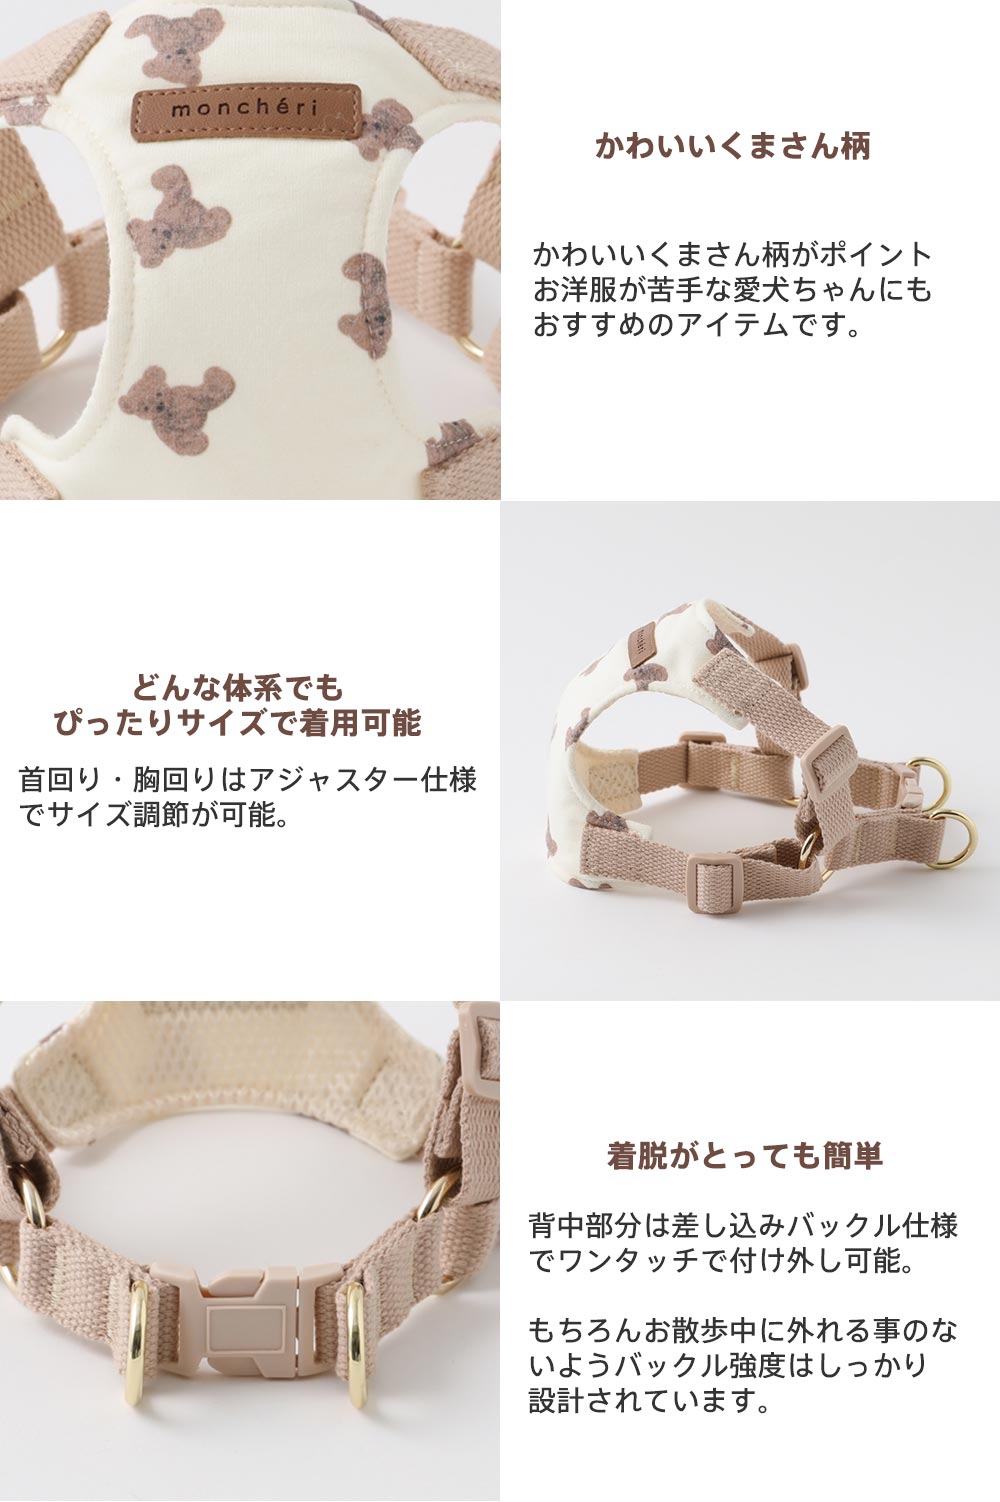 Small dog/Luc harness/harness/backpack/Cute/bear/bear pattern/Recommended point